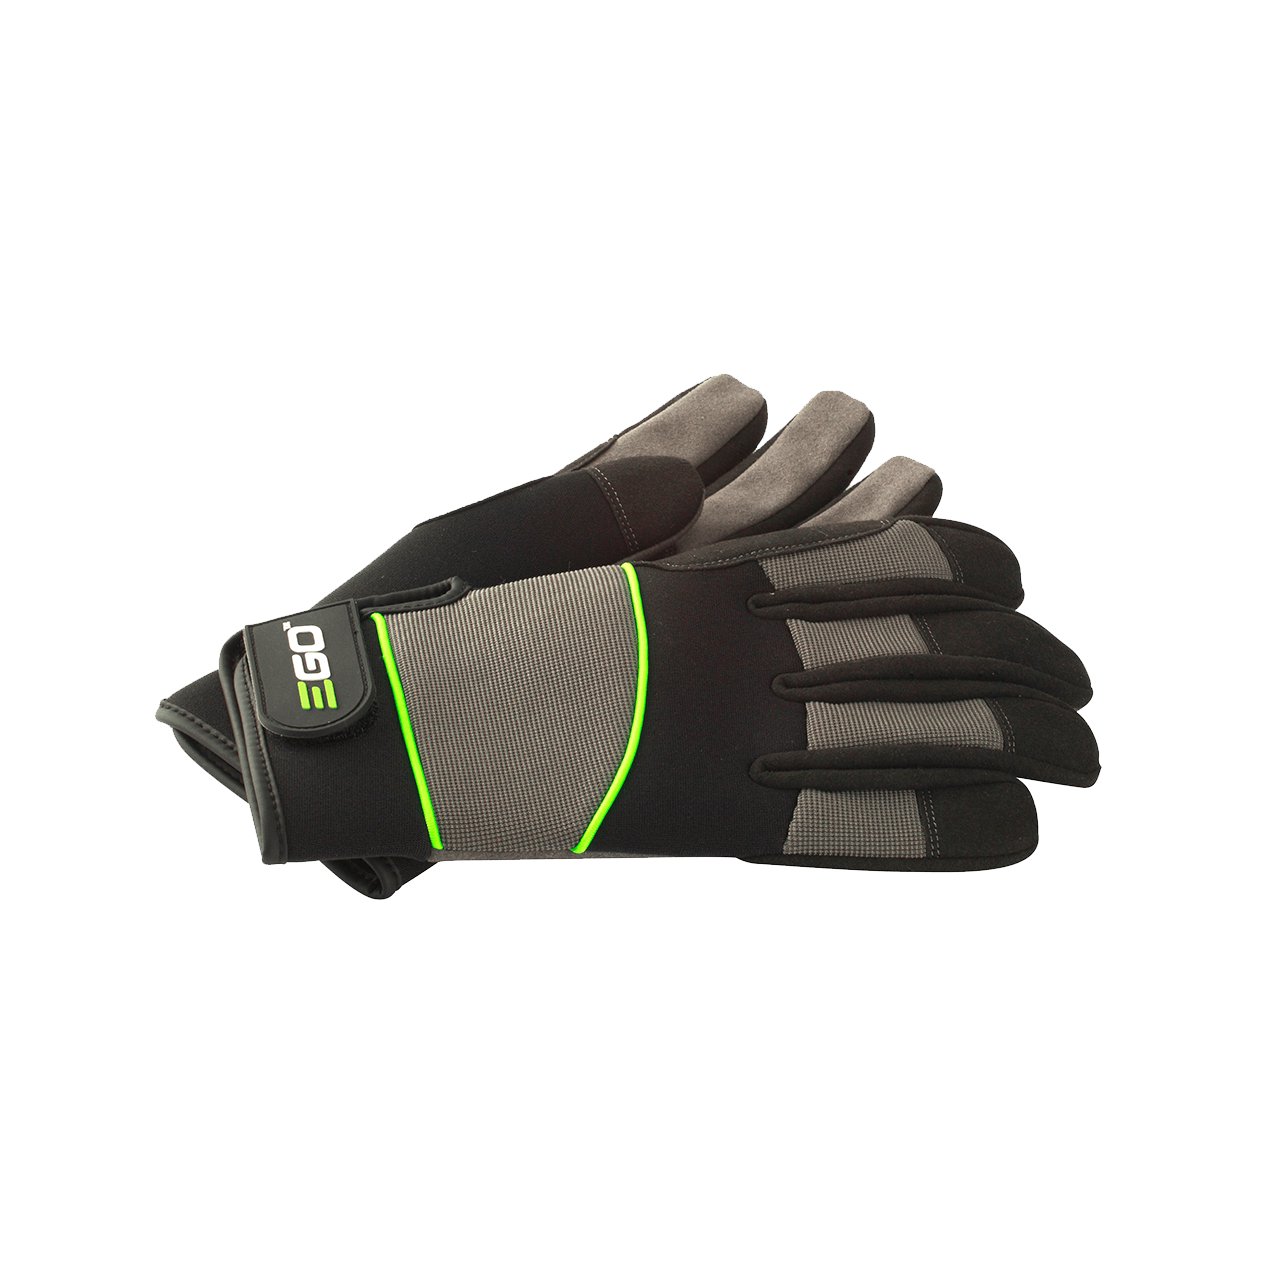 EGO GV001 SYNTHETIC WORK GLOVES